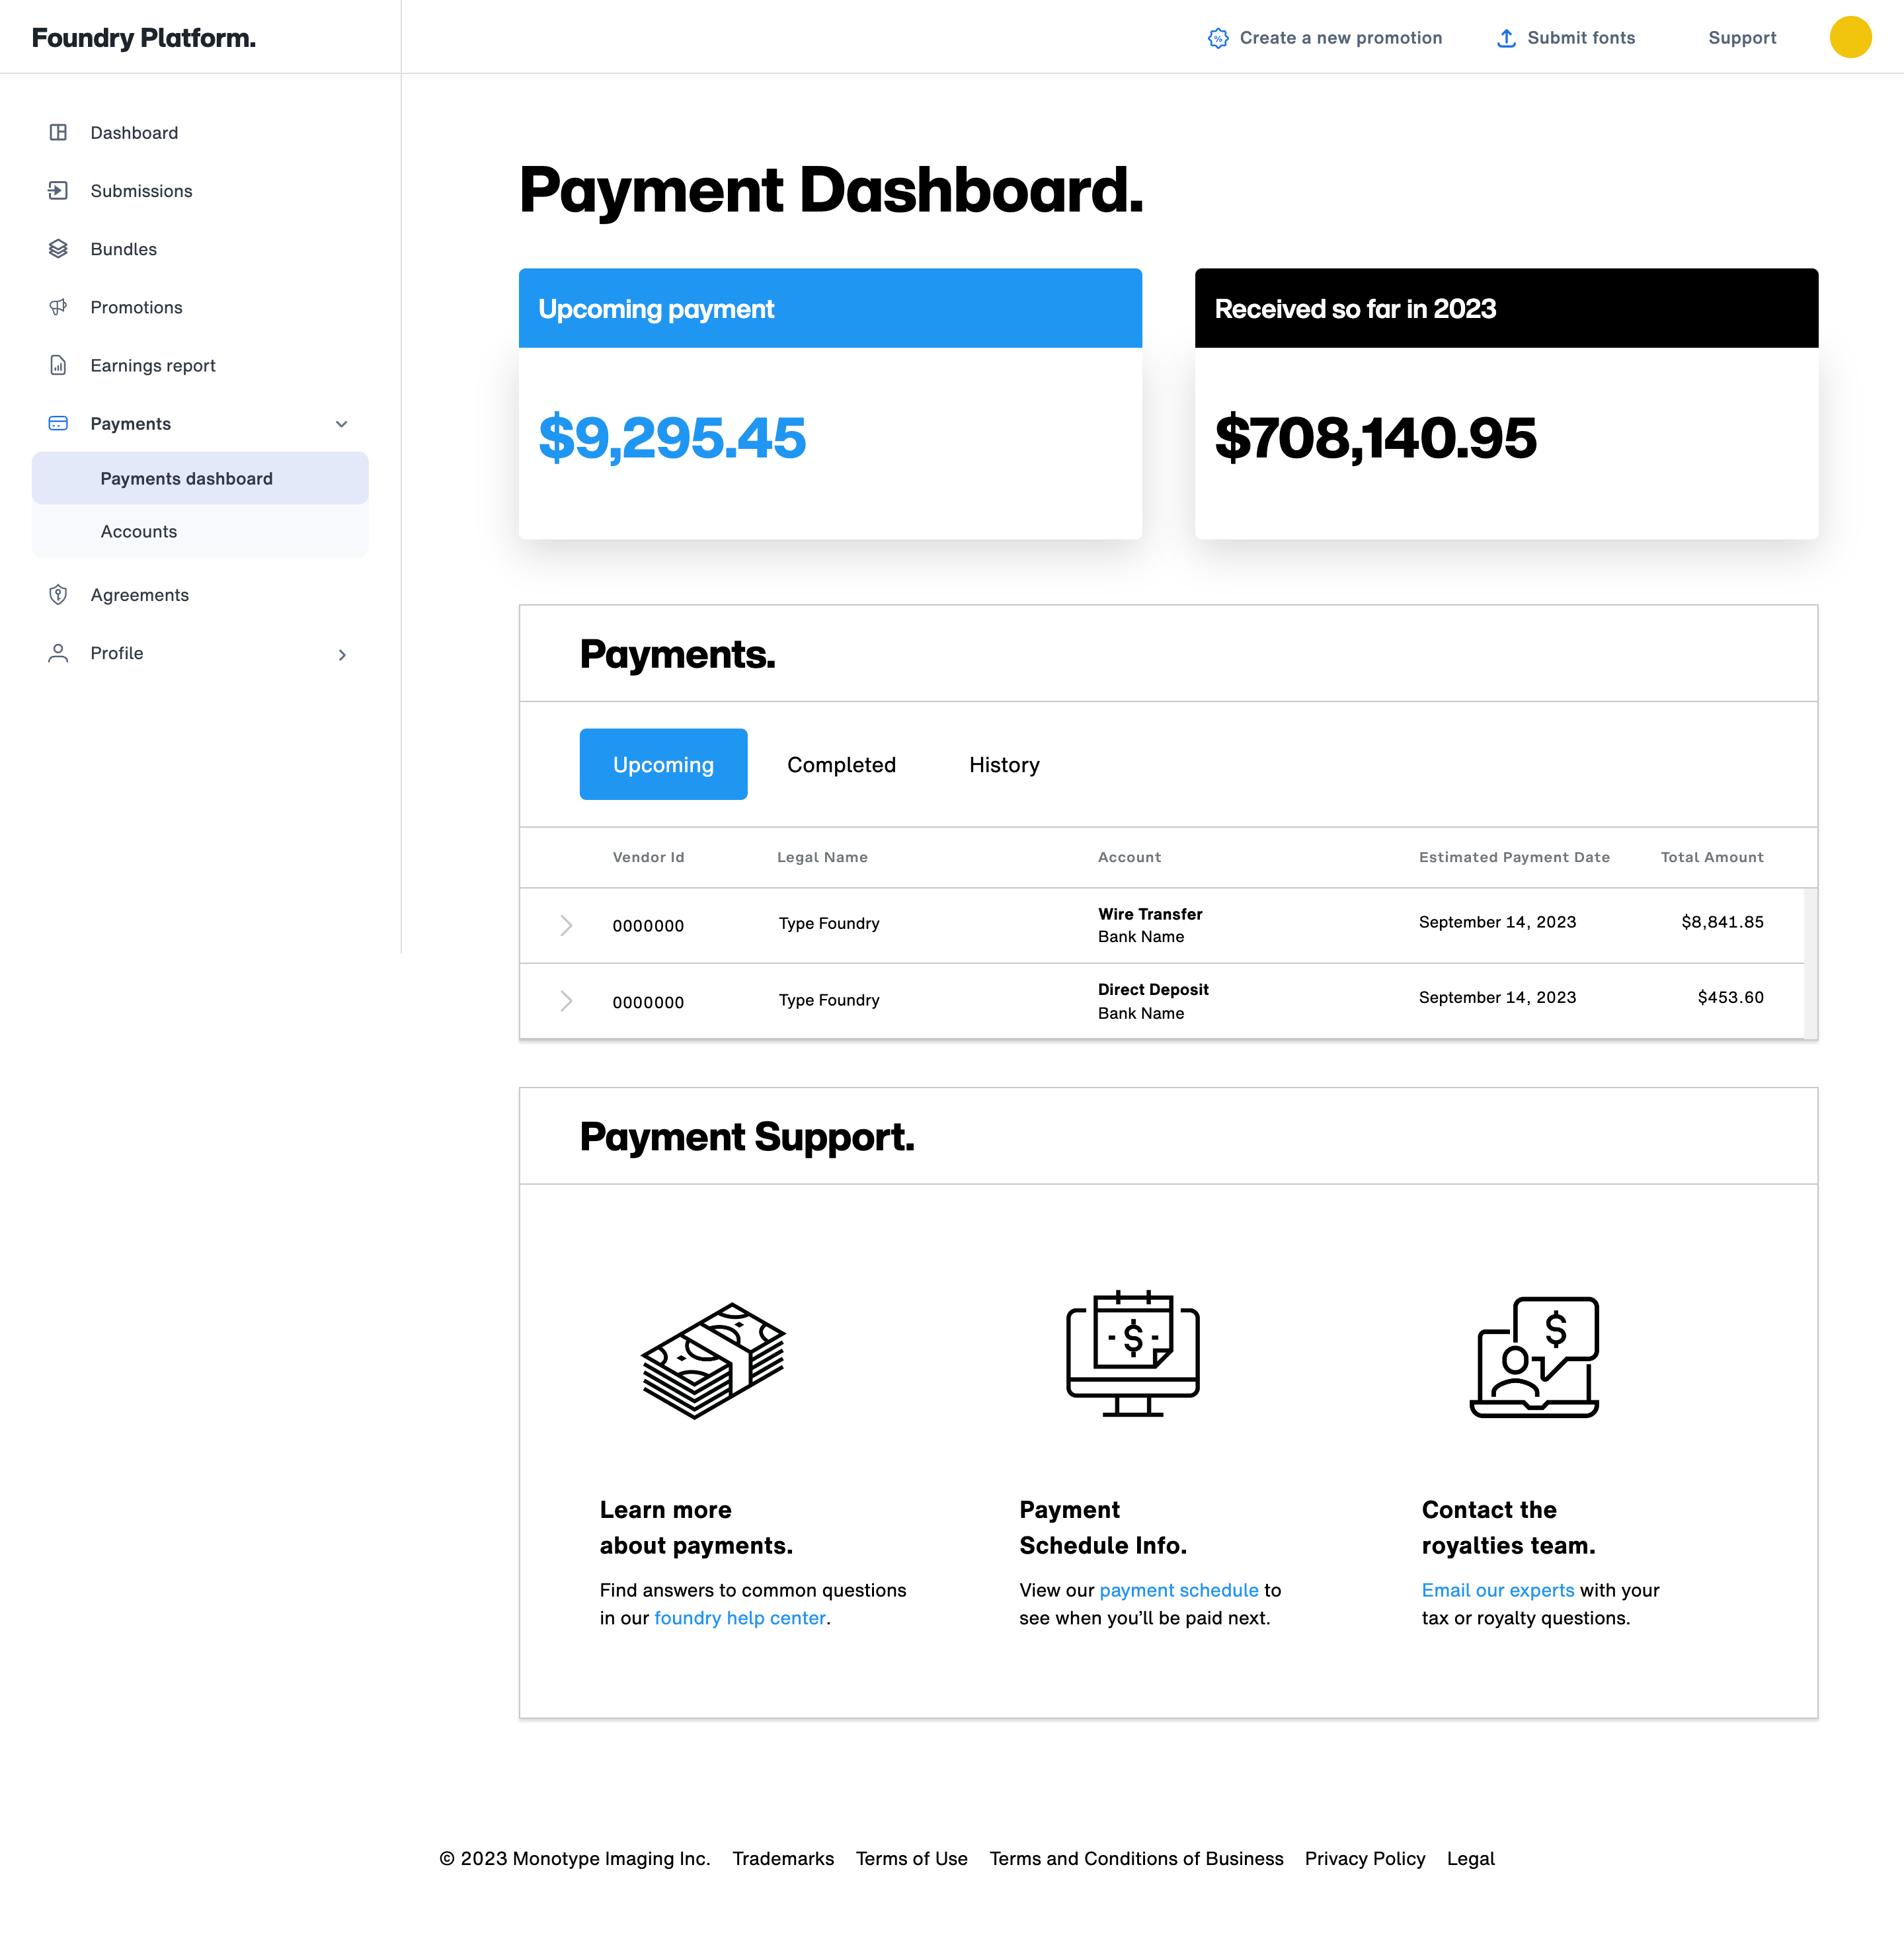 FP_1a_PaymentsDashboard_Upcoming.png